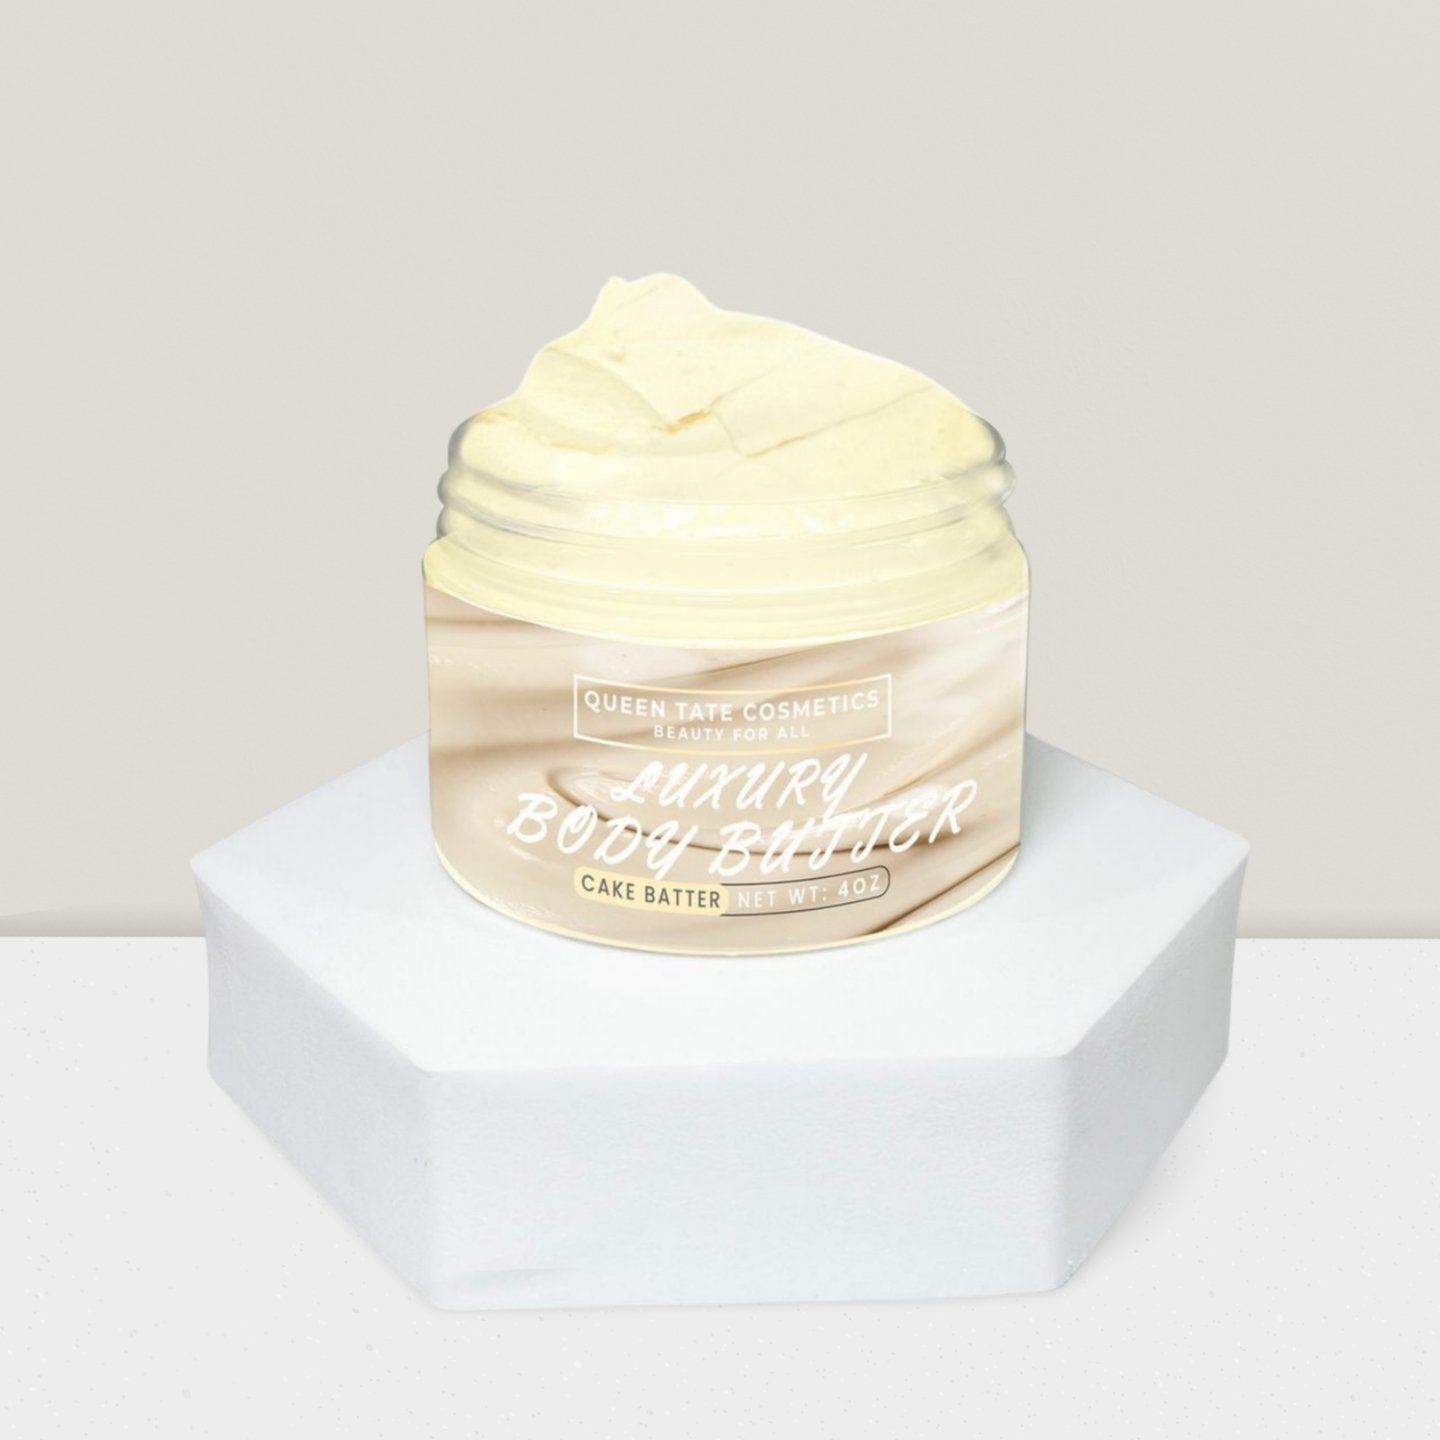 Cake Batter-Handcrafted Body Butter - Queen Tate CosmeticsHandcrafted Luxury Body ButterCake Batter-Handcrafted Body ButterHandcrafted Luxury Body ButterQueen Tate Cosmetics 8oz